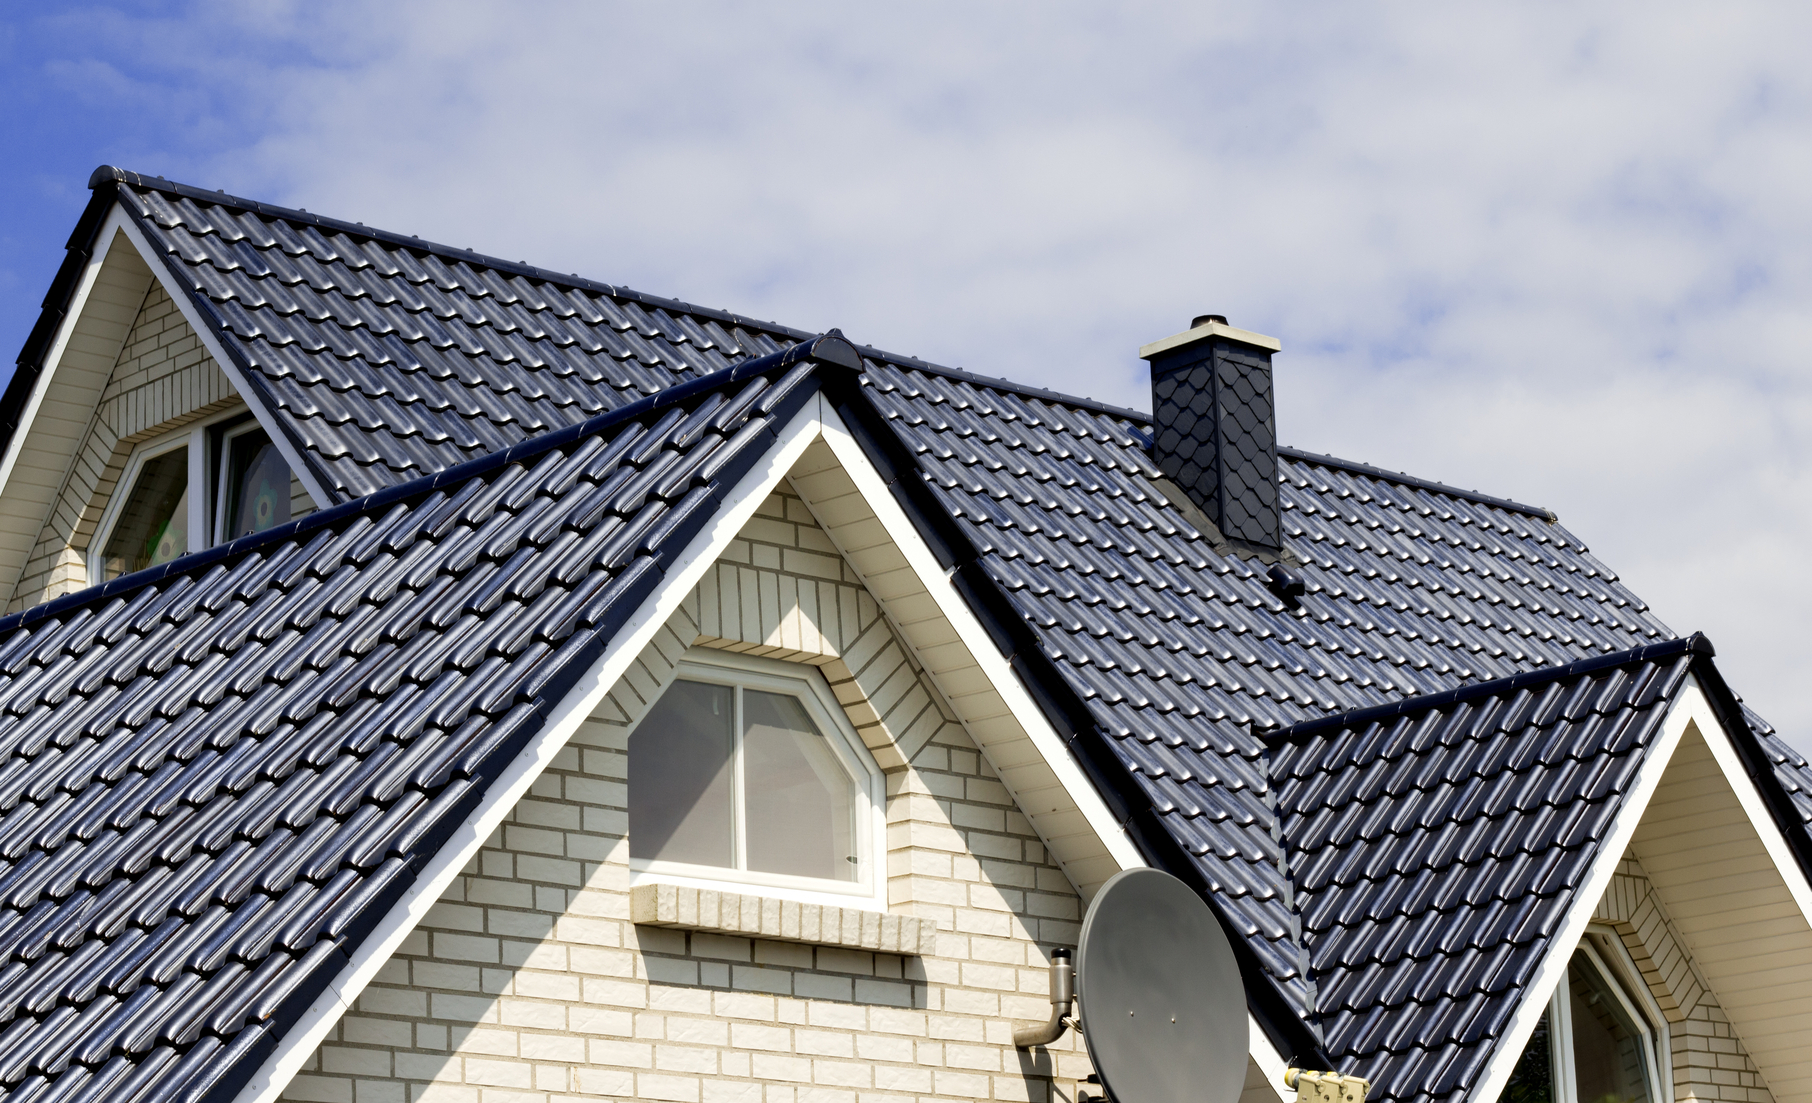 Ways Of Increasing The Lifespan Of A Roof